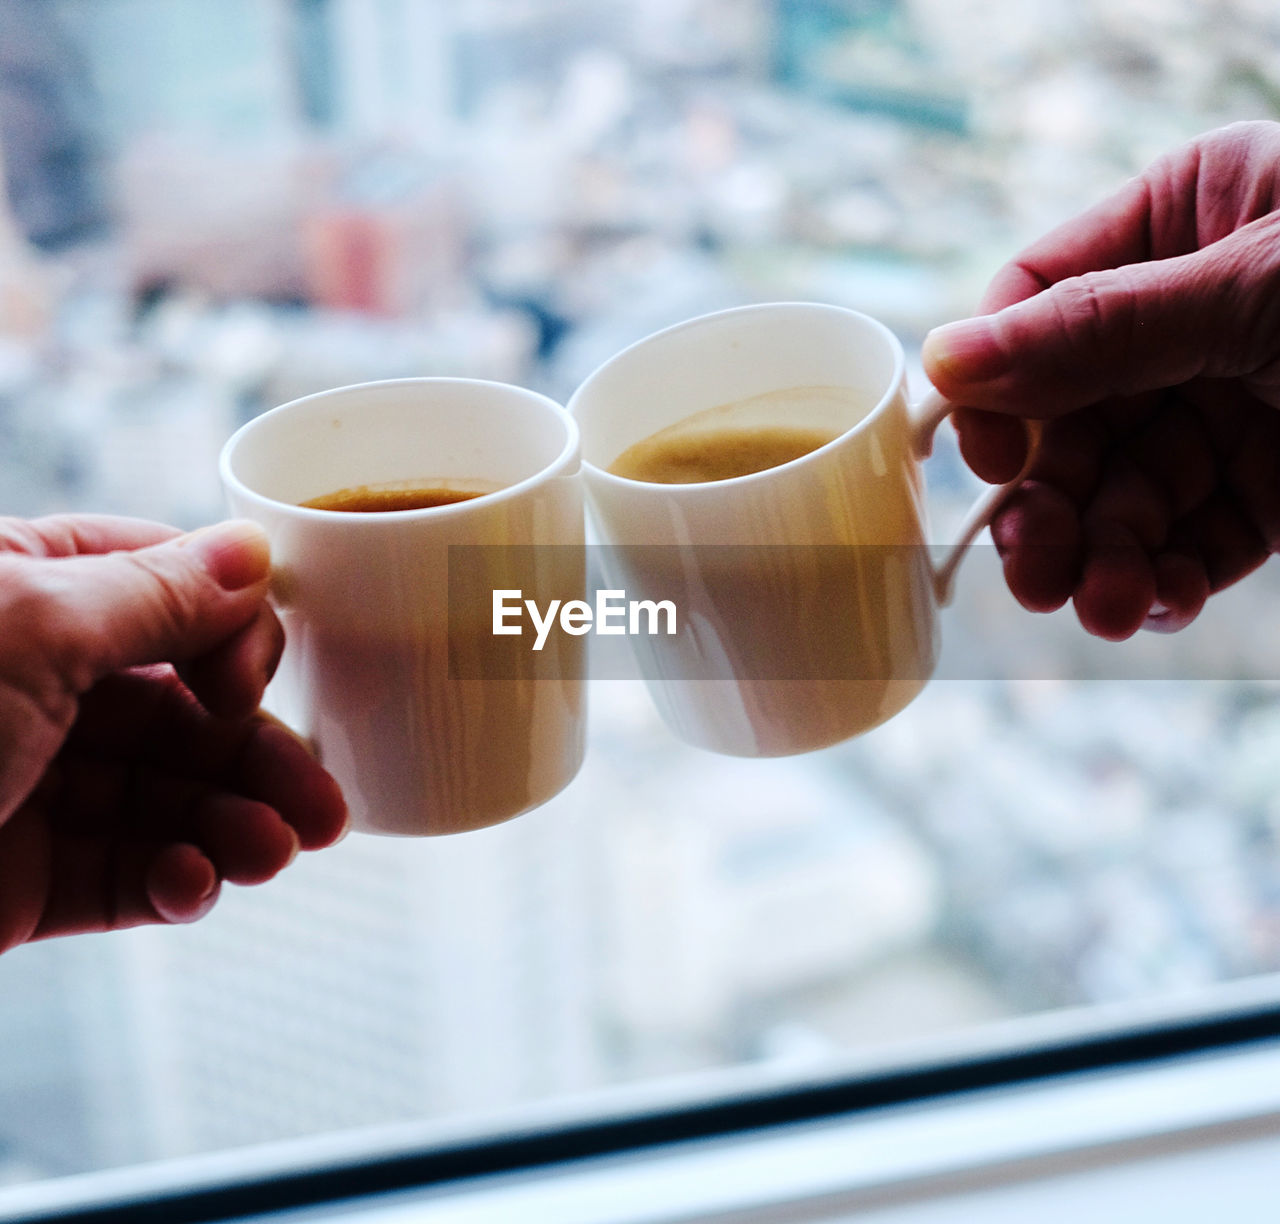 Cropped image of two persons holding coffee cup